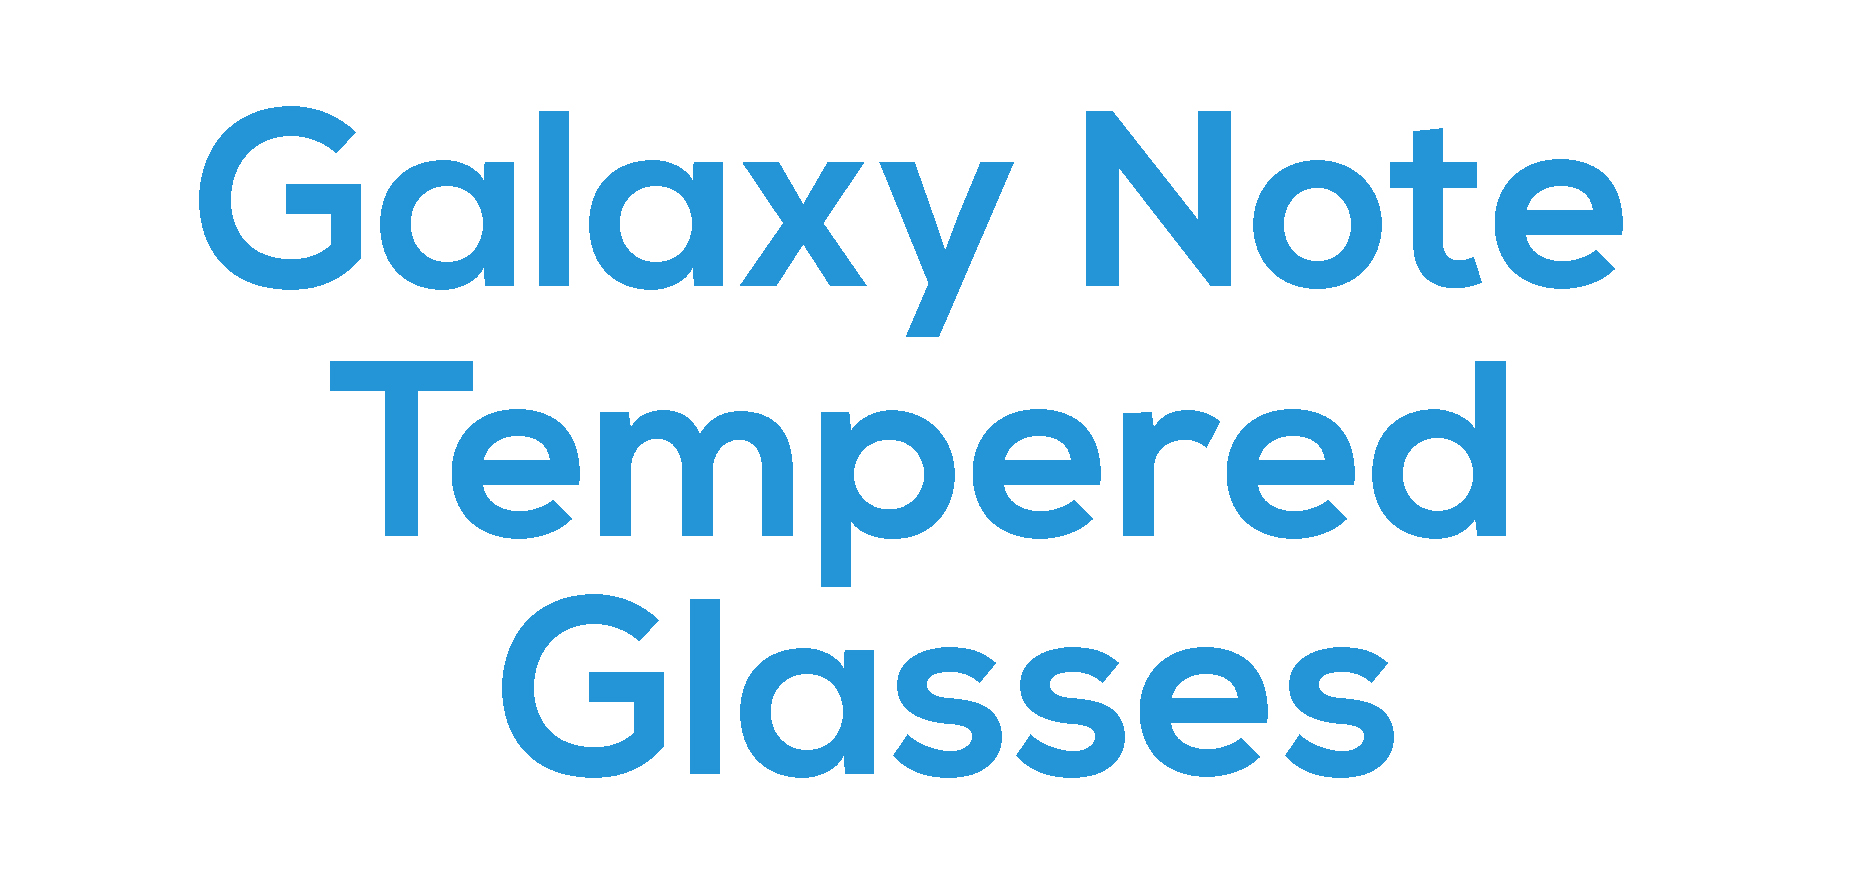 Galaxy Note Tempered Glasses